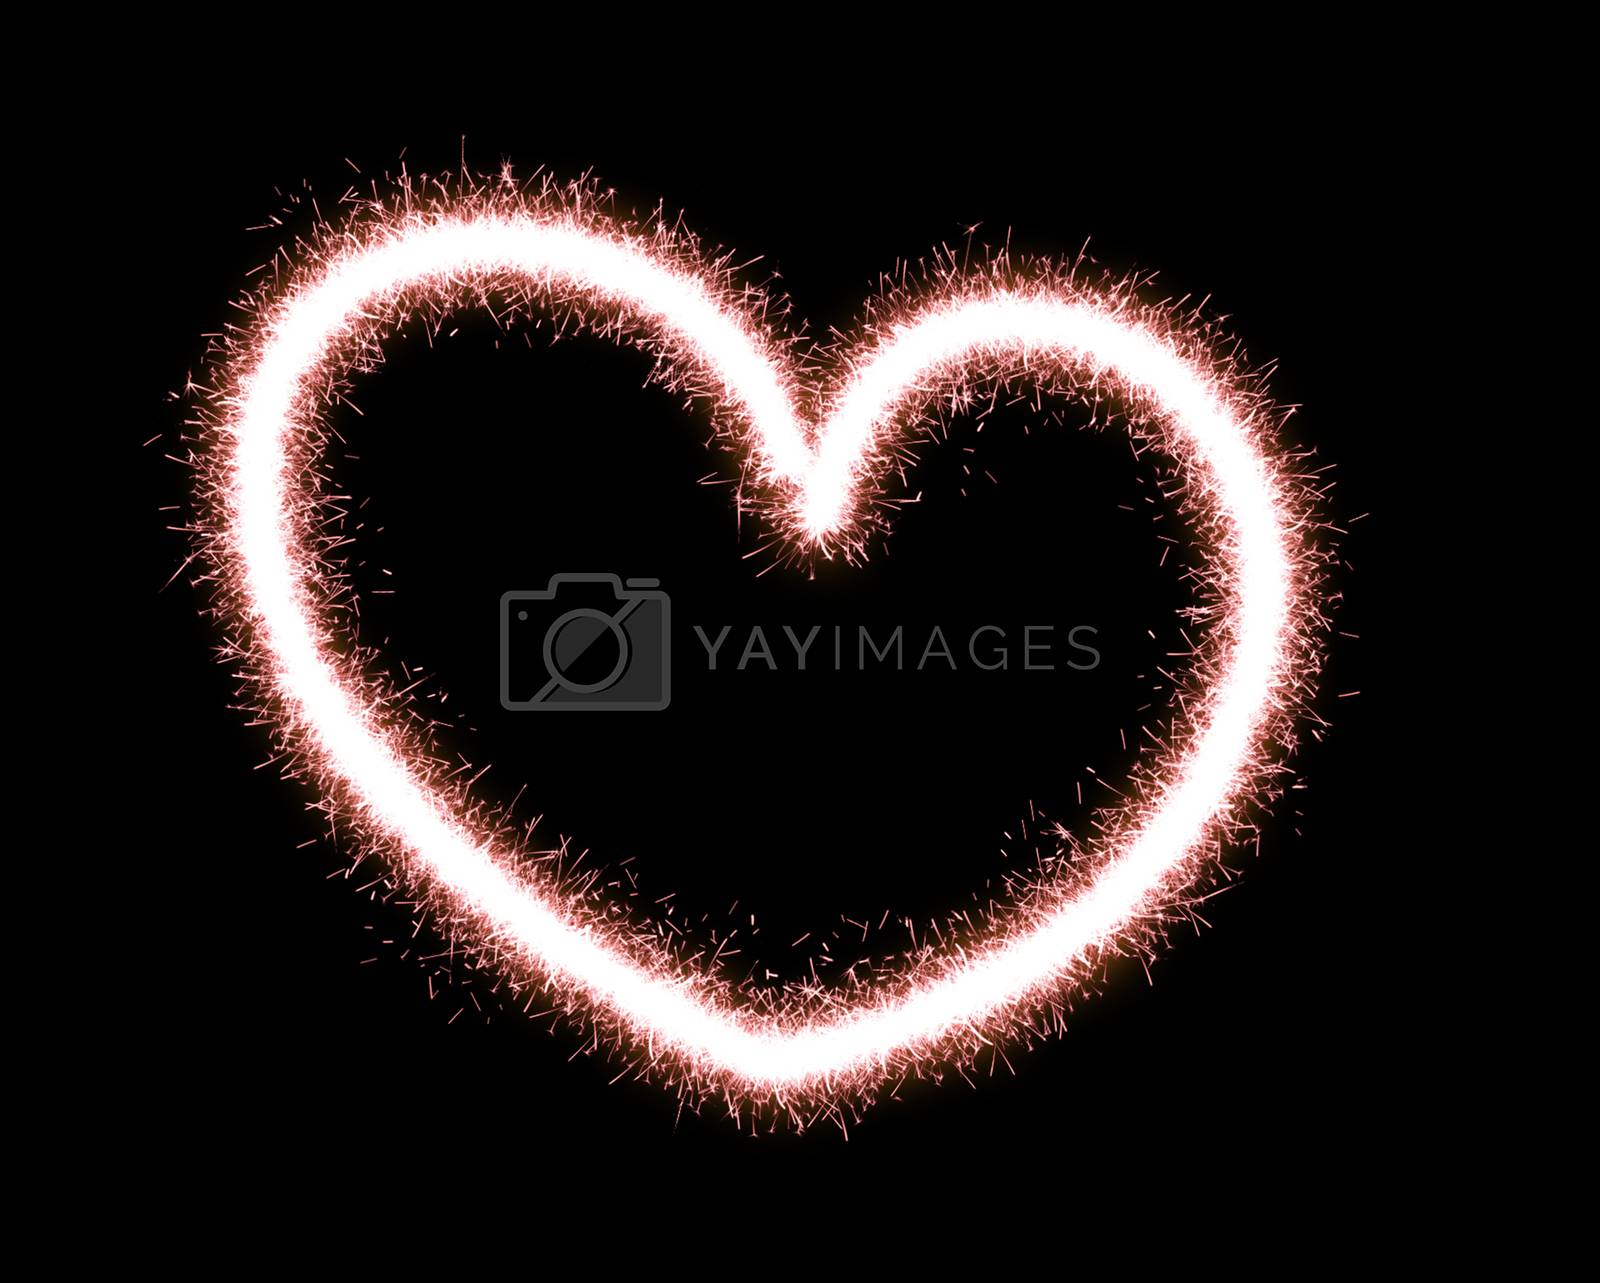 Royalty free image of valentines day, I love you, romantic background. by hakankacar2014